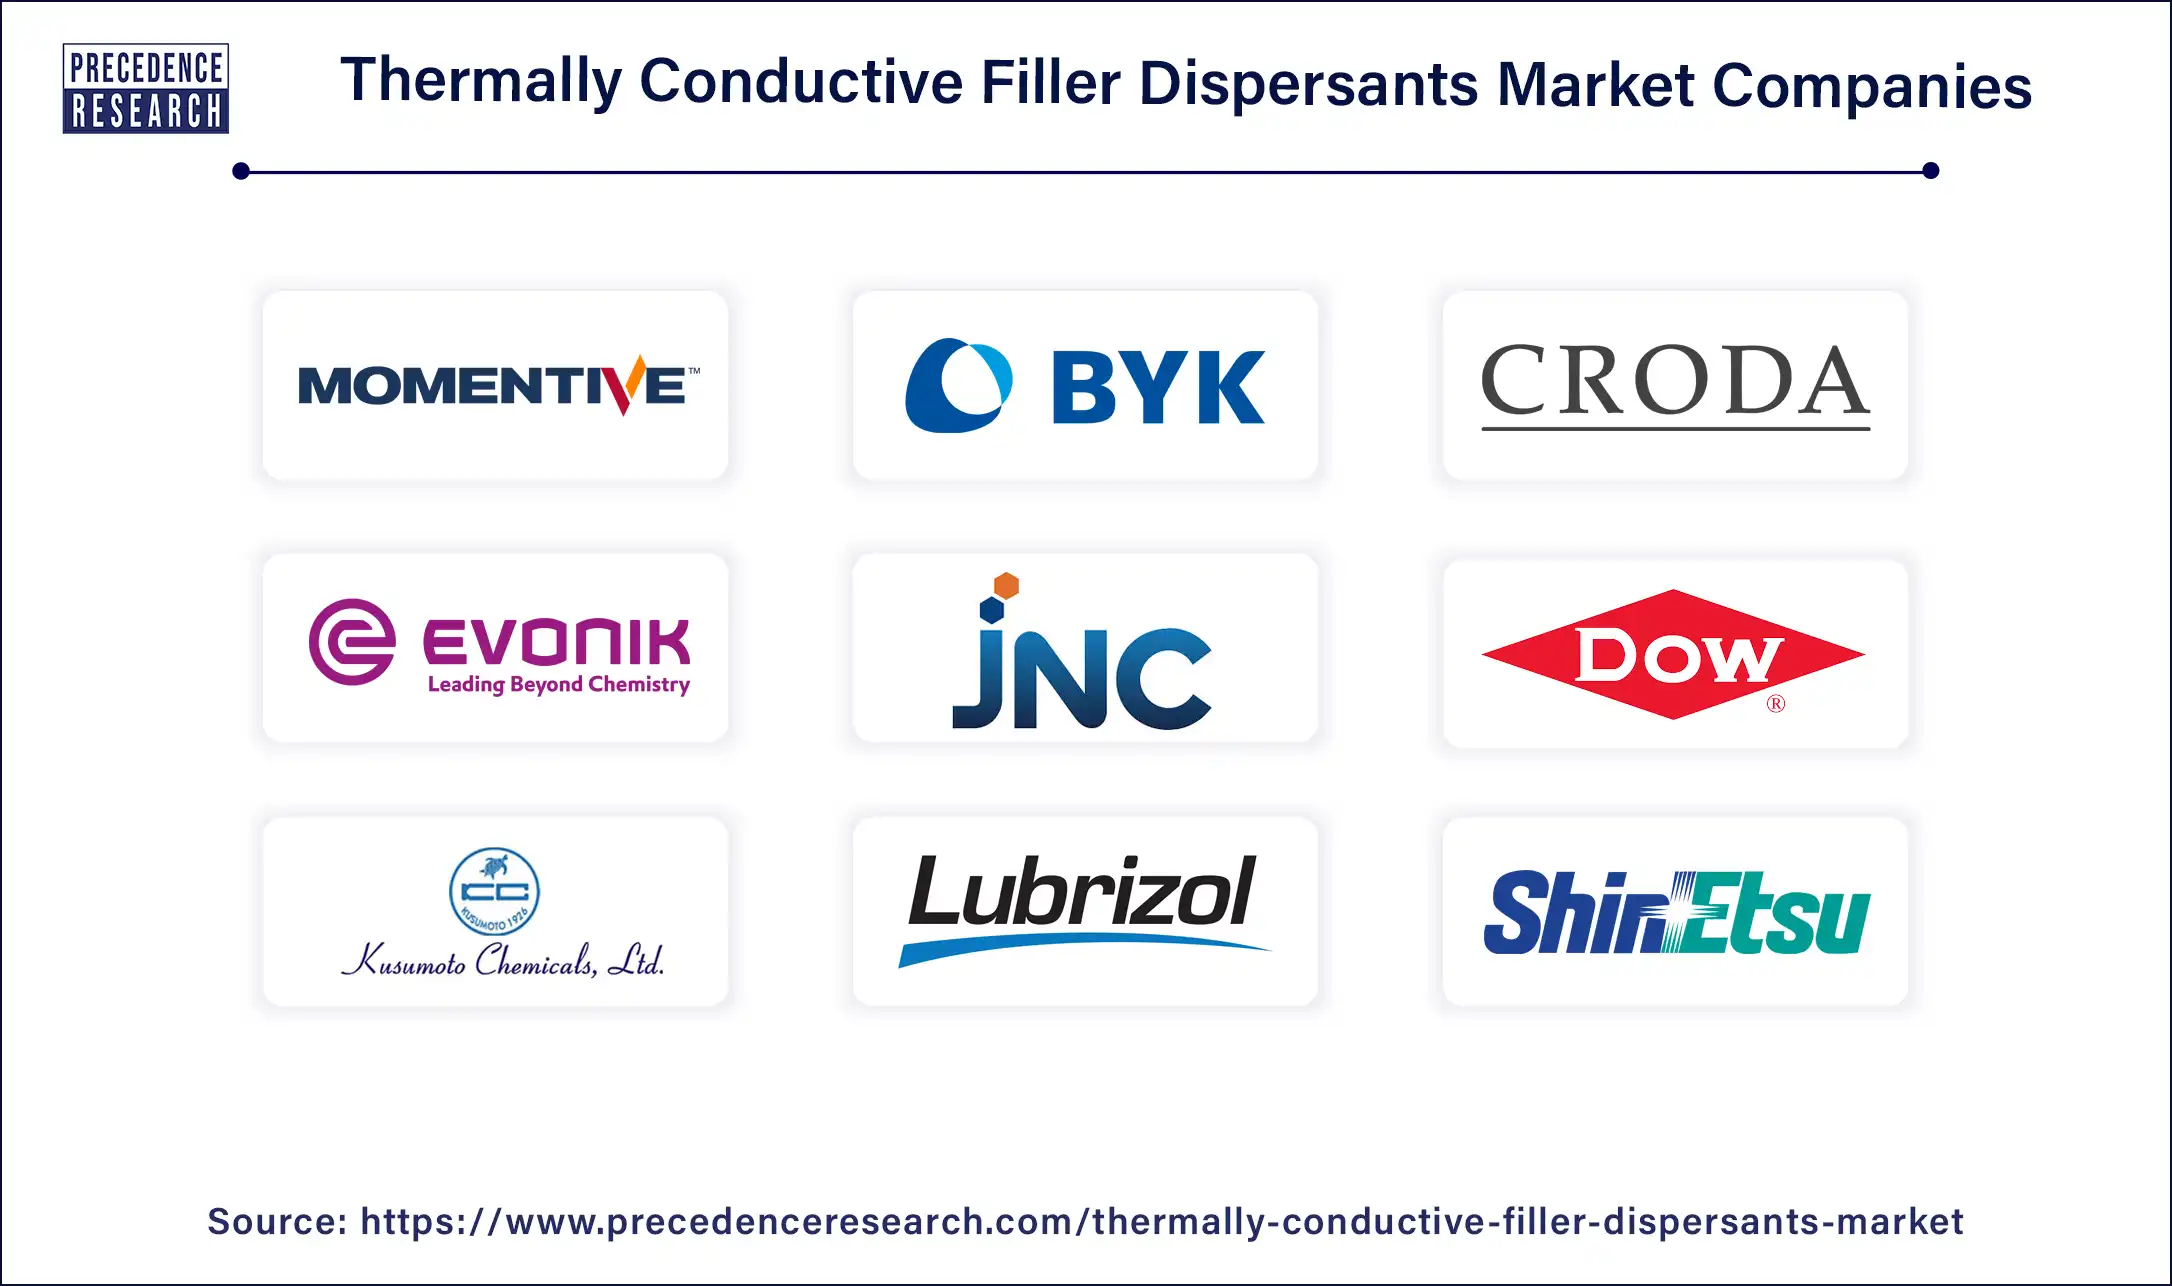 Thermally Conductive Filler Dispersants Companies